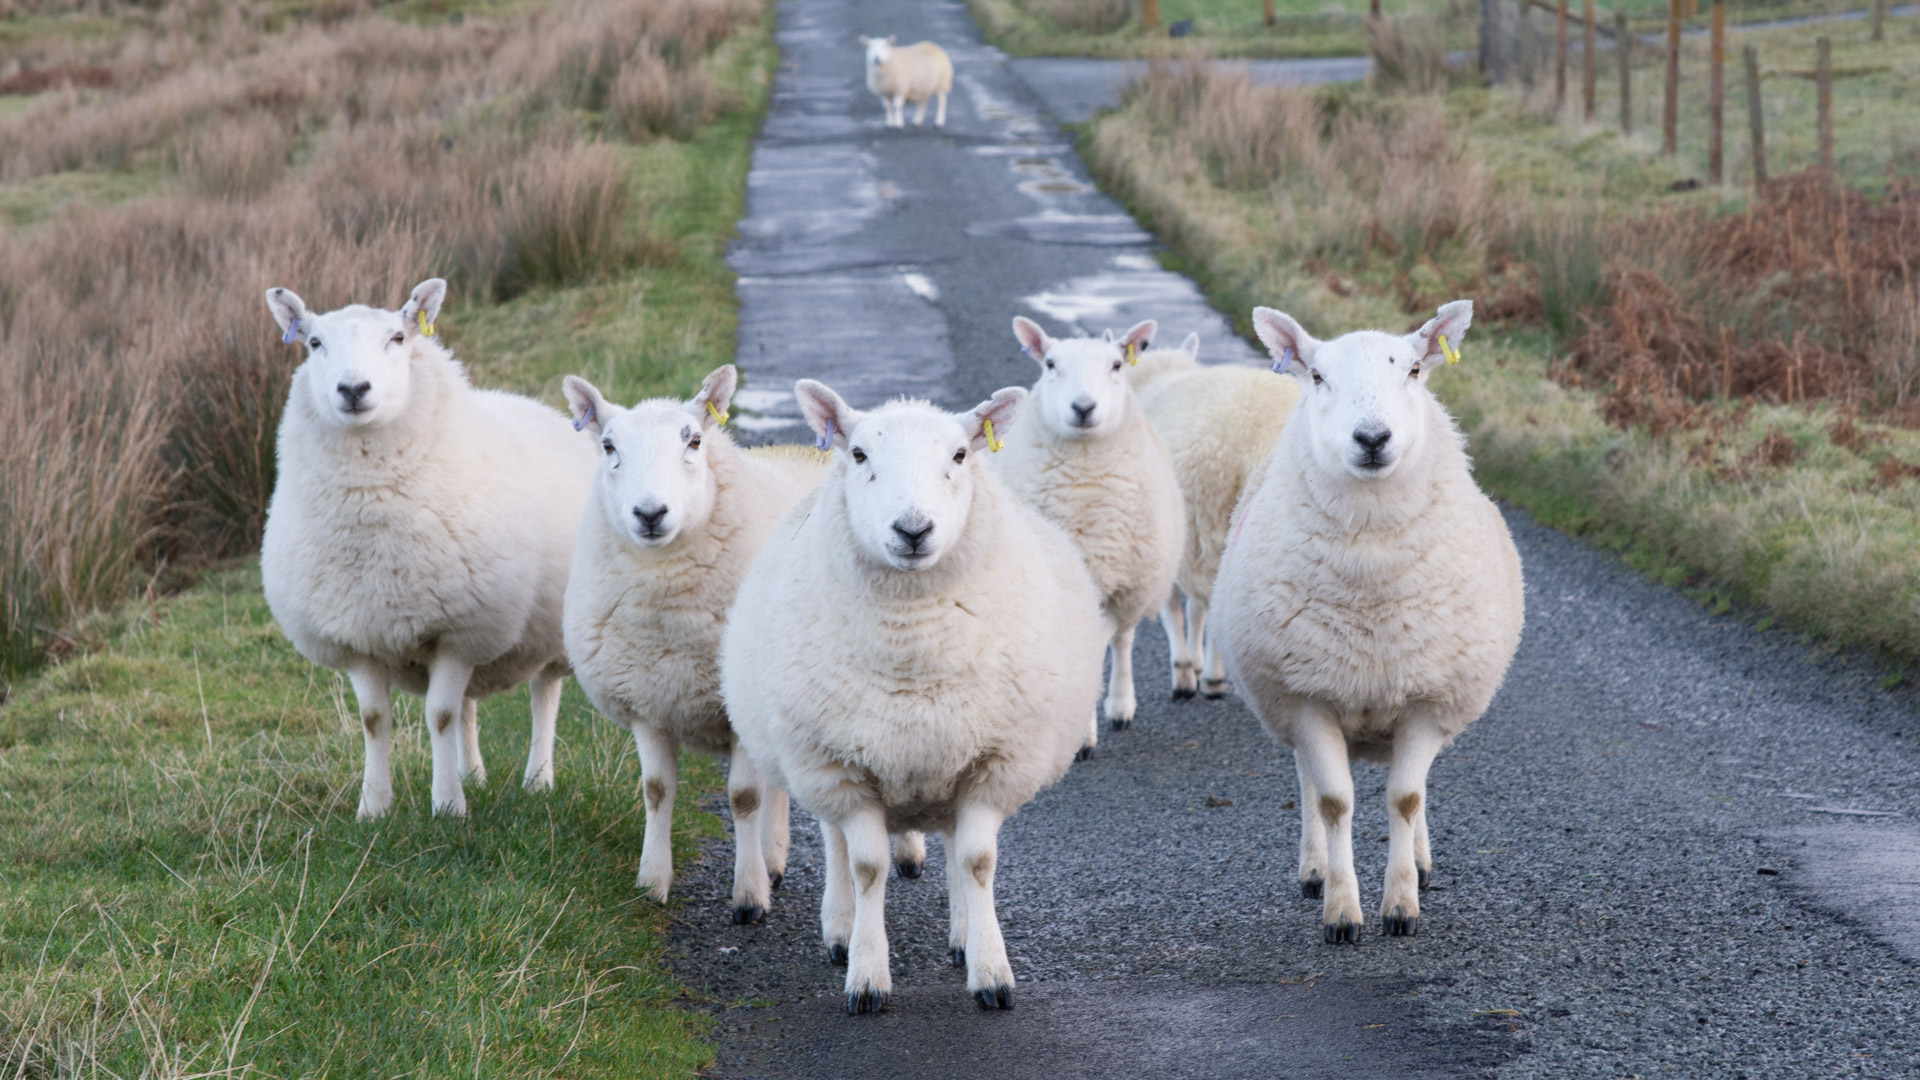 Ose Sheep in the road.